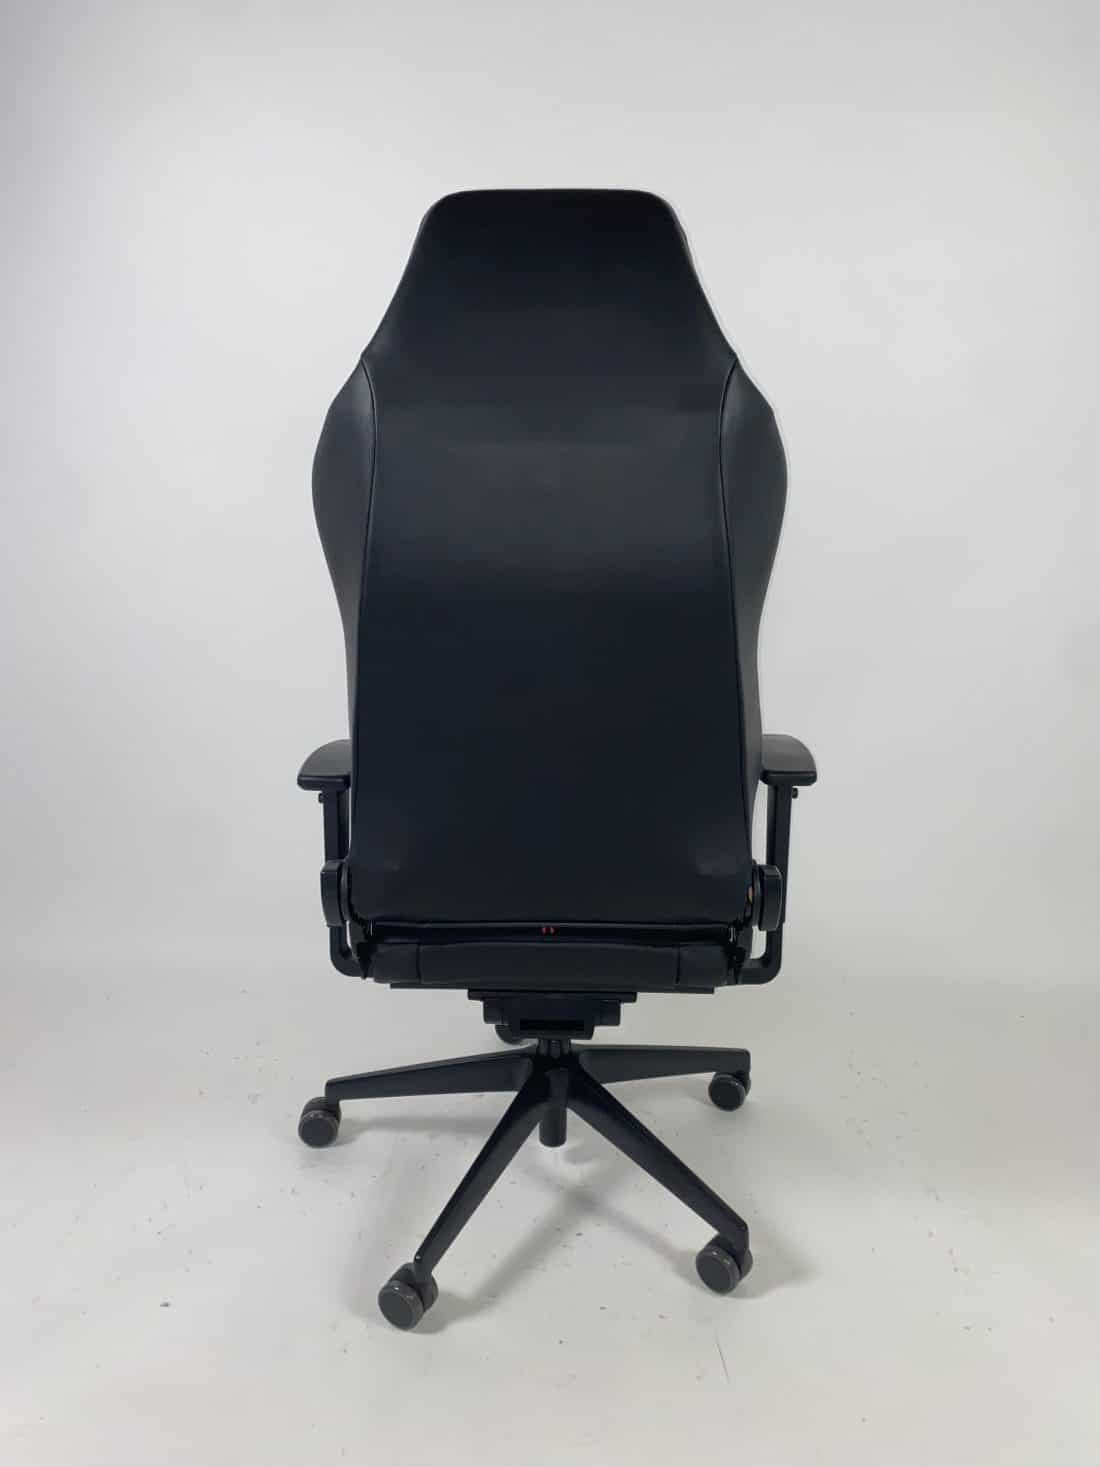 Trp Post Container Data Trp Post Id 13959 Recaro Speed Star Office chair Trp Post Container